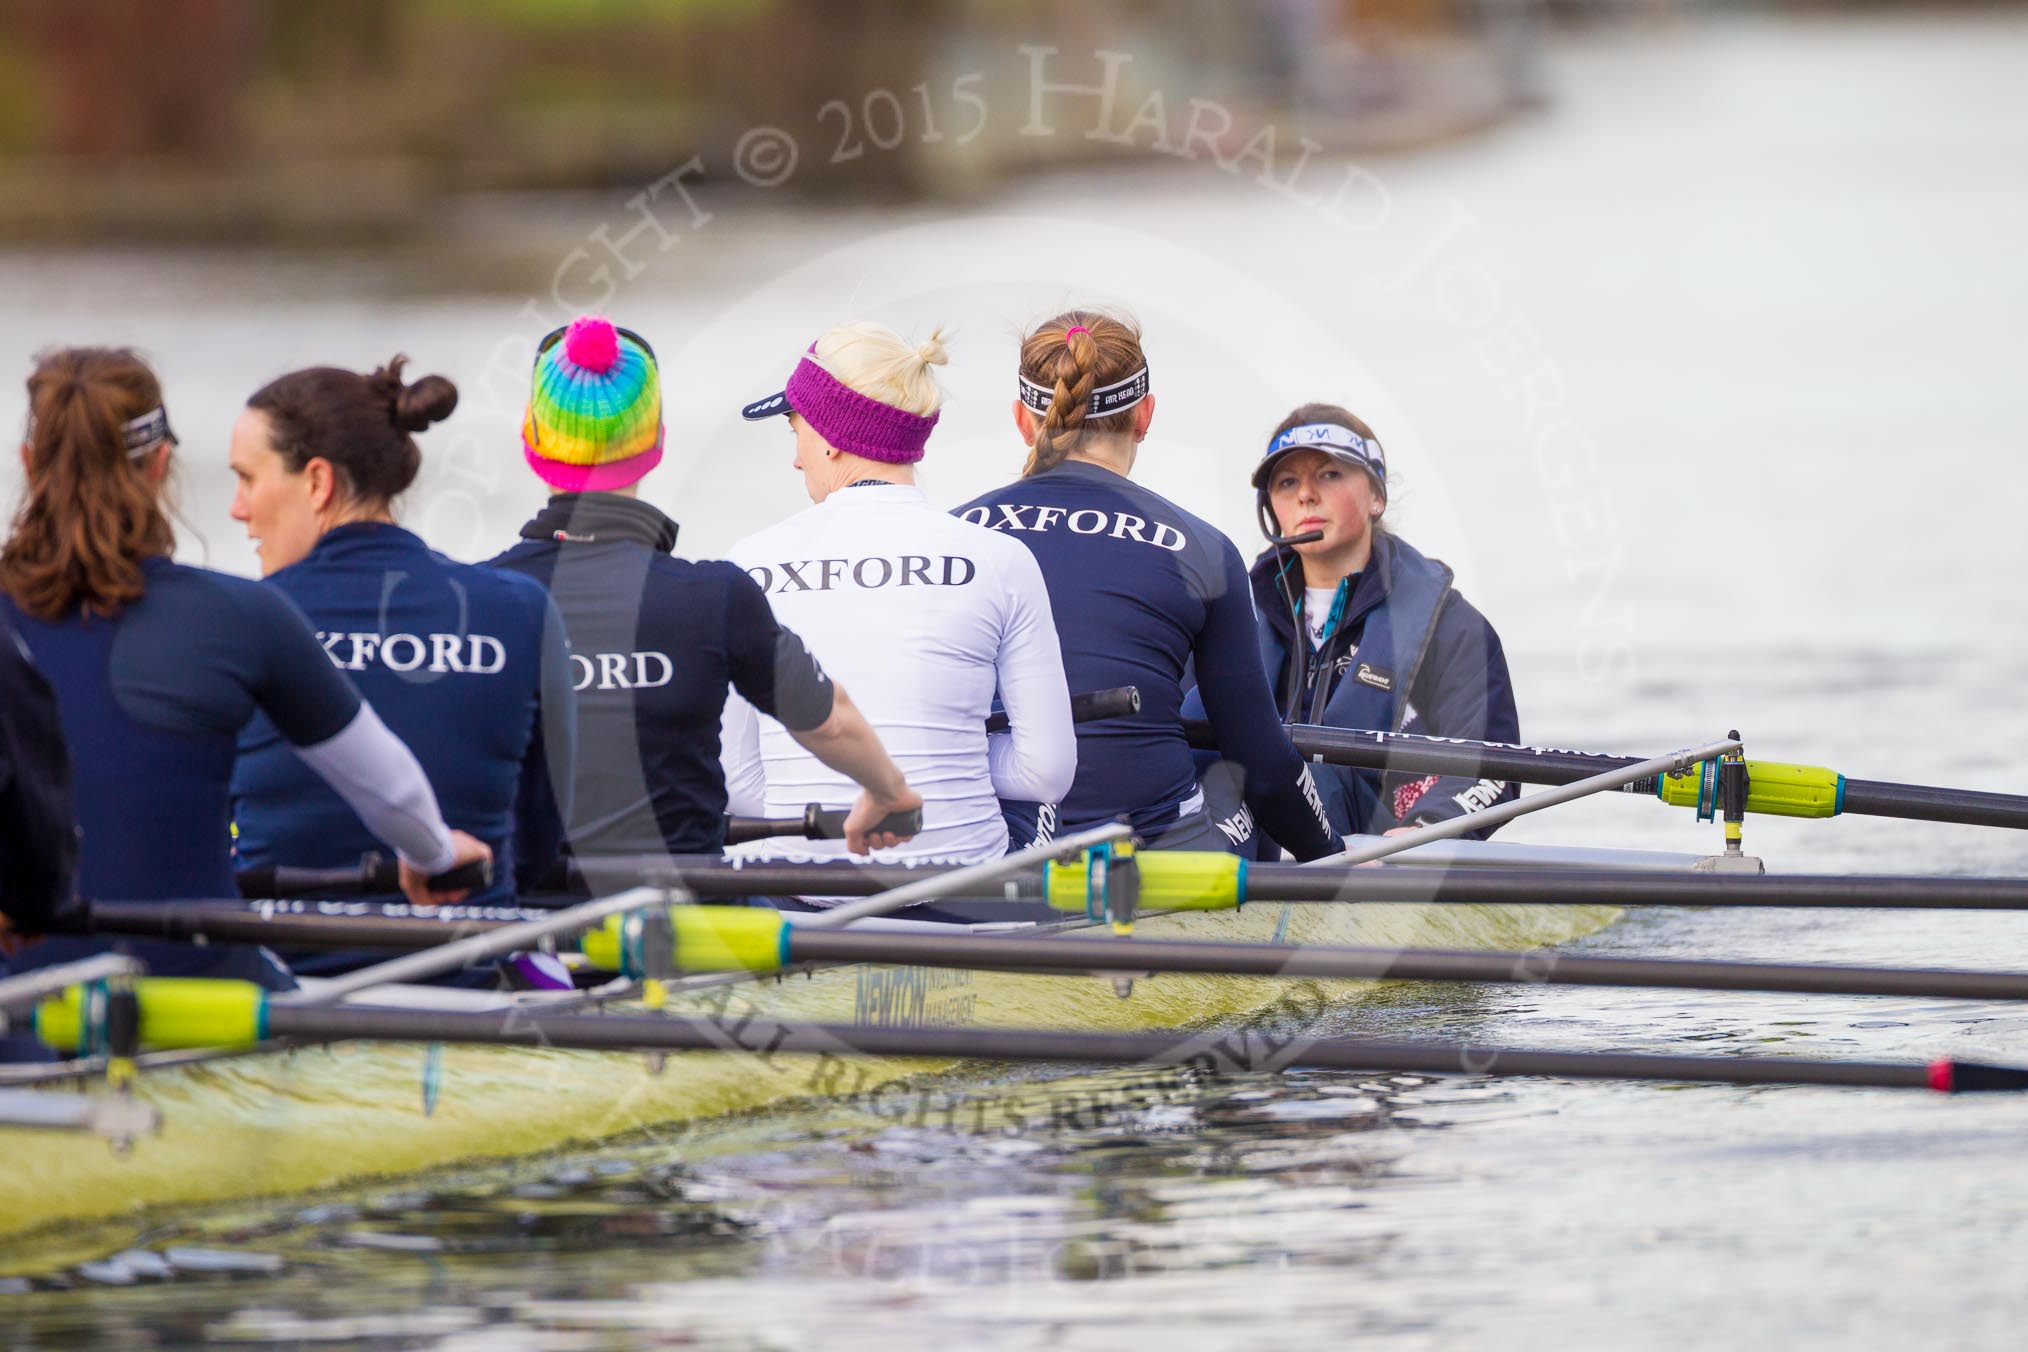 The Boat Race season 2015: OUWBC training Wallingford.

Wallingford,

United Kingdom,
on 04 March 2015 at 16:42, image #223